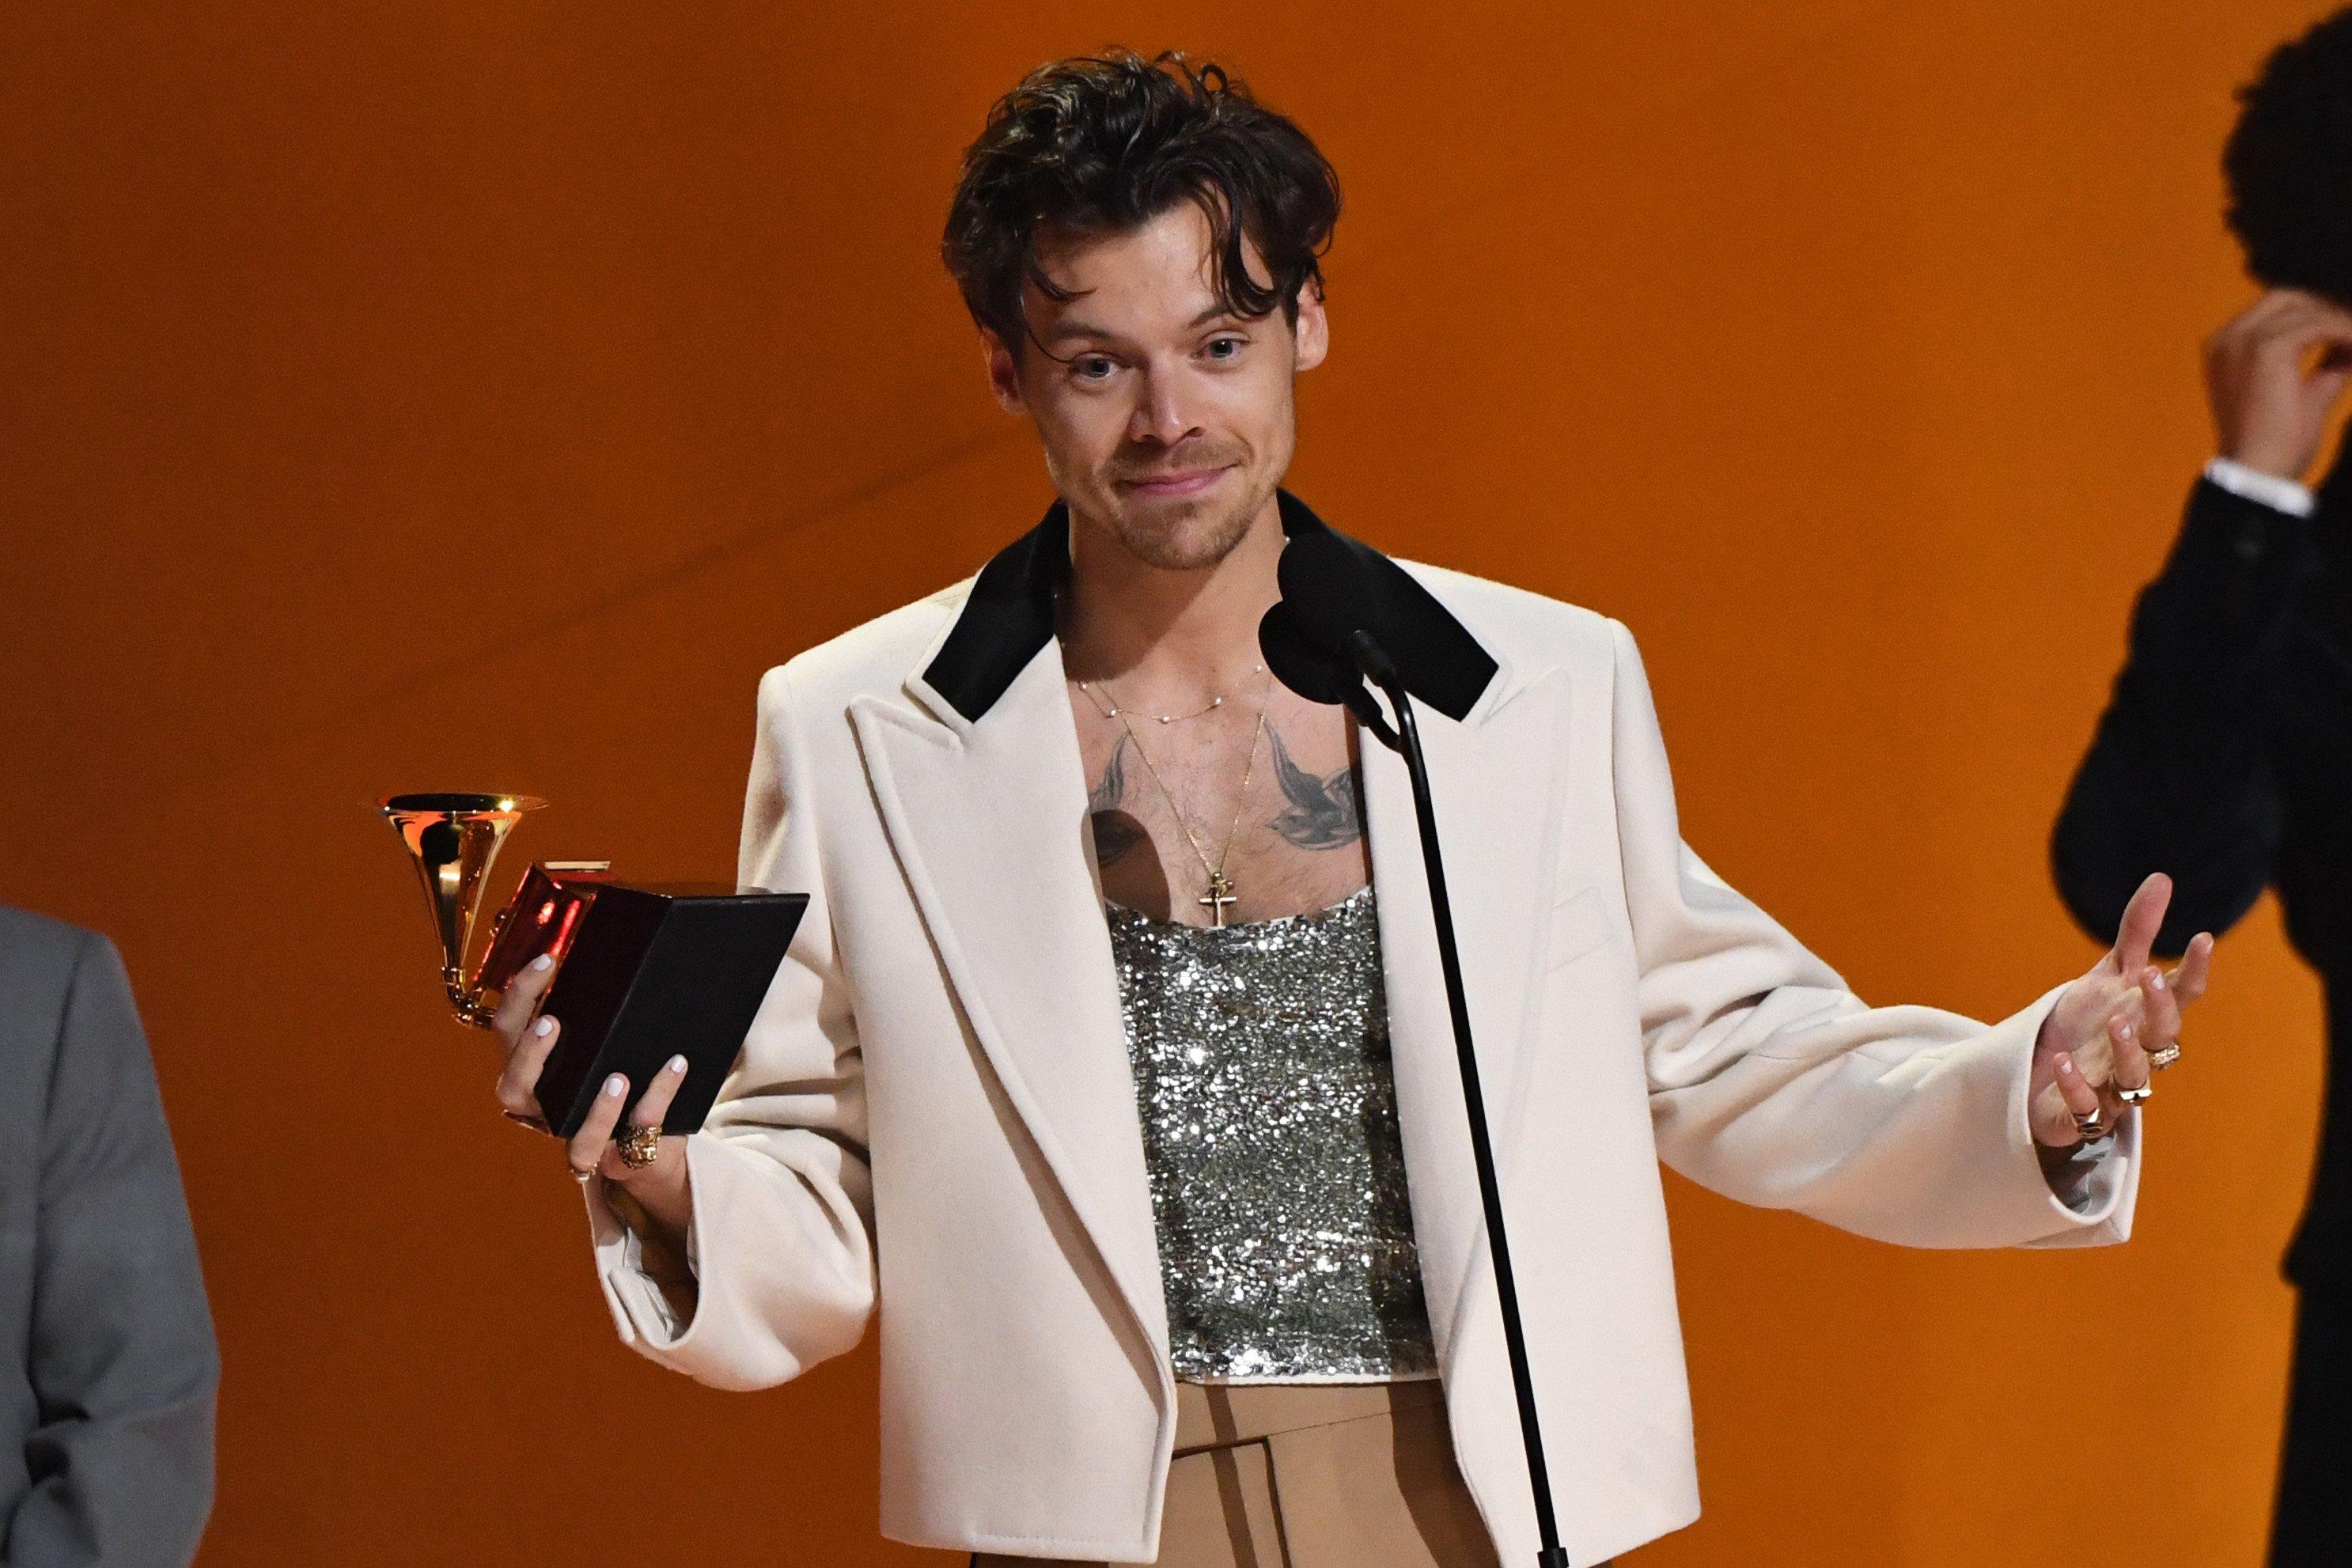 Photo of Harry Styles winning the GRAMMY for Album of the Year at the 2023 GRAMMYs